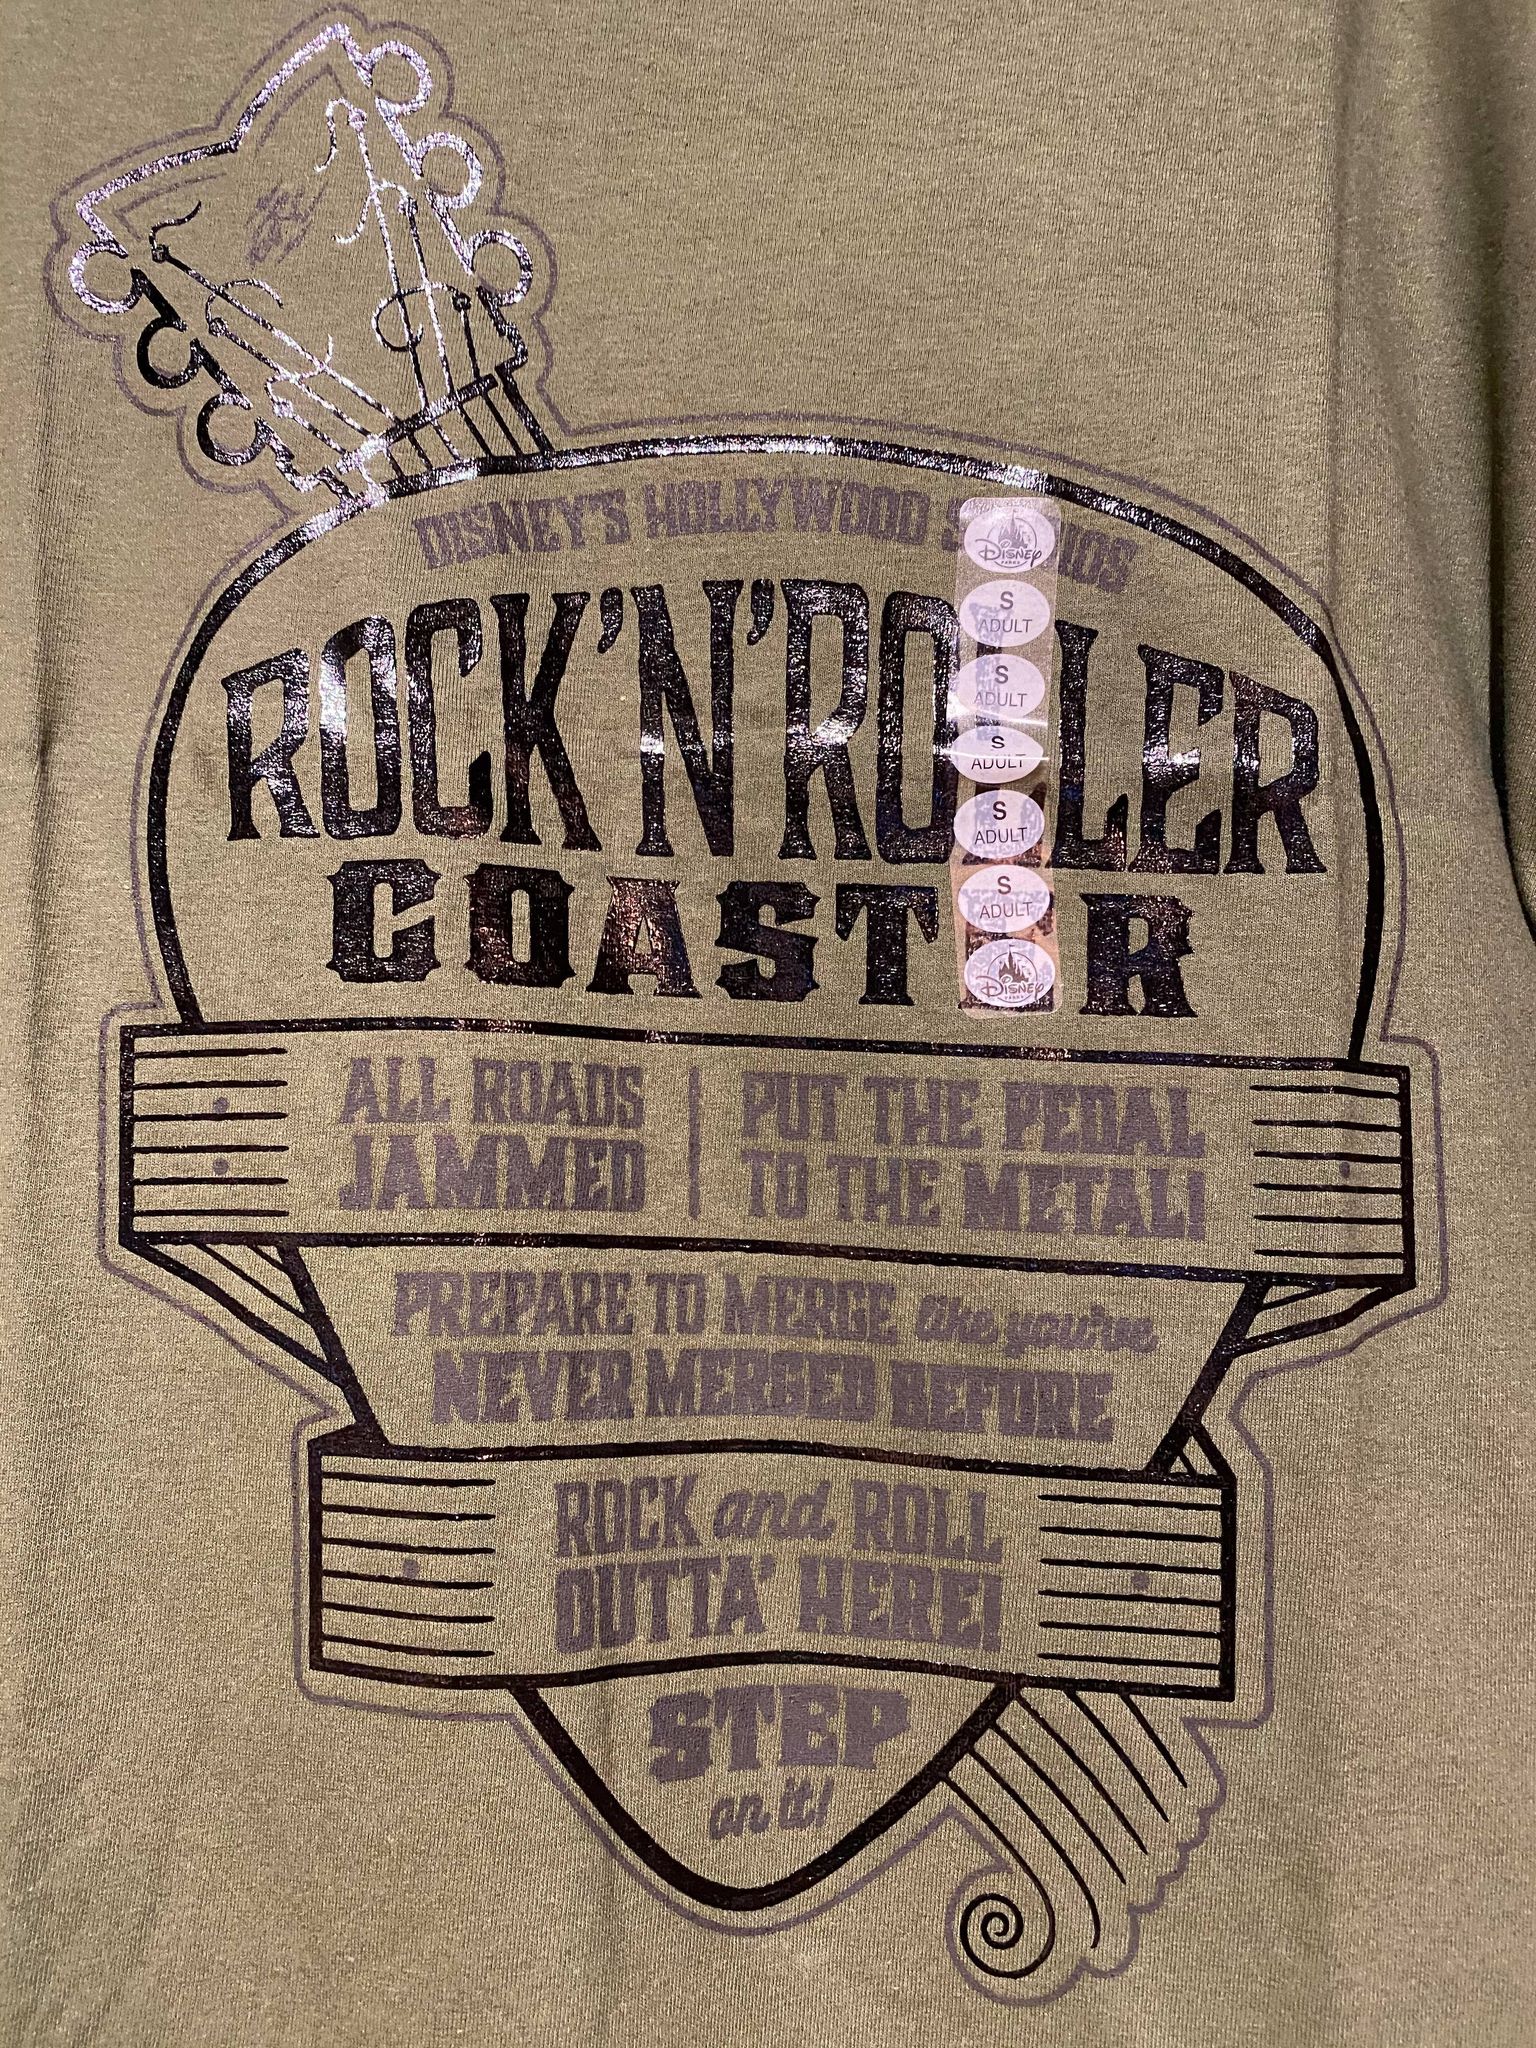 Rock 'n' Roller Coaster T-Shirts have sped into Disney's Hollywood ...